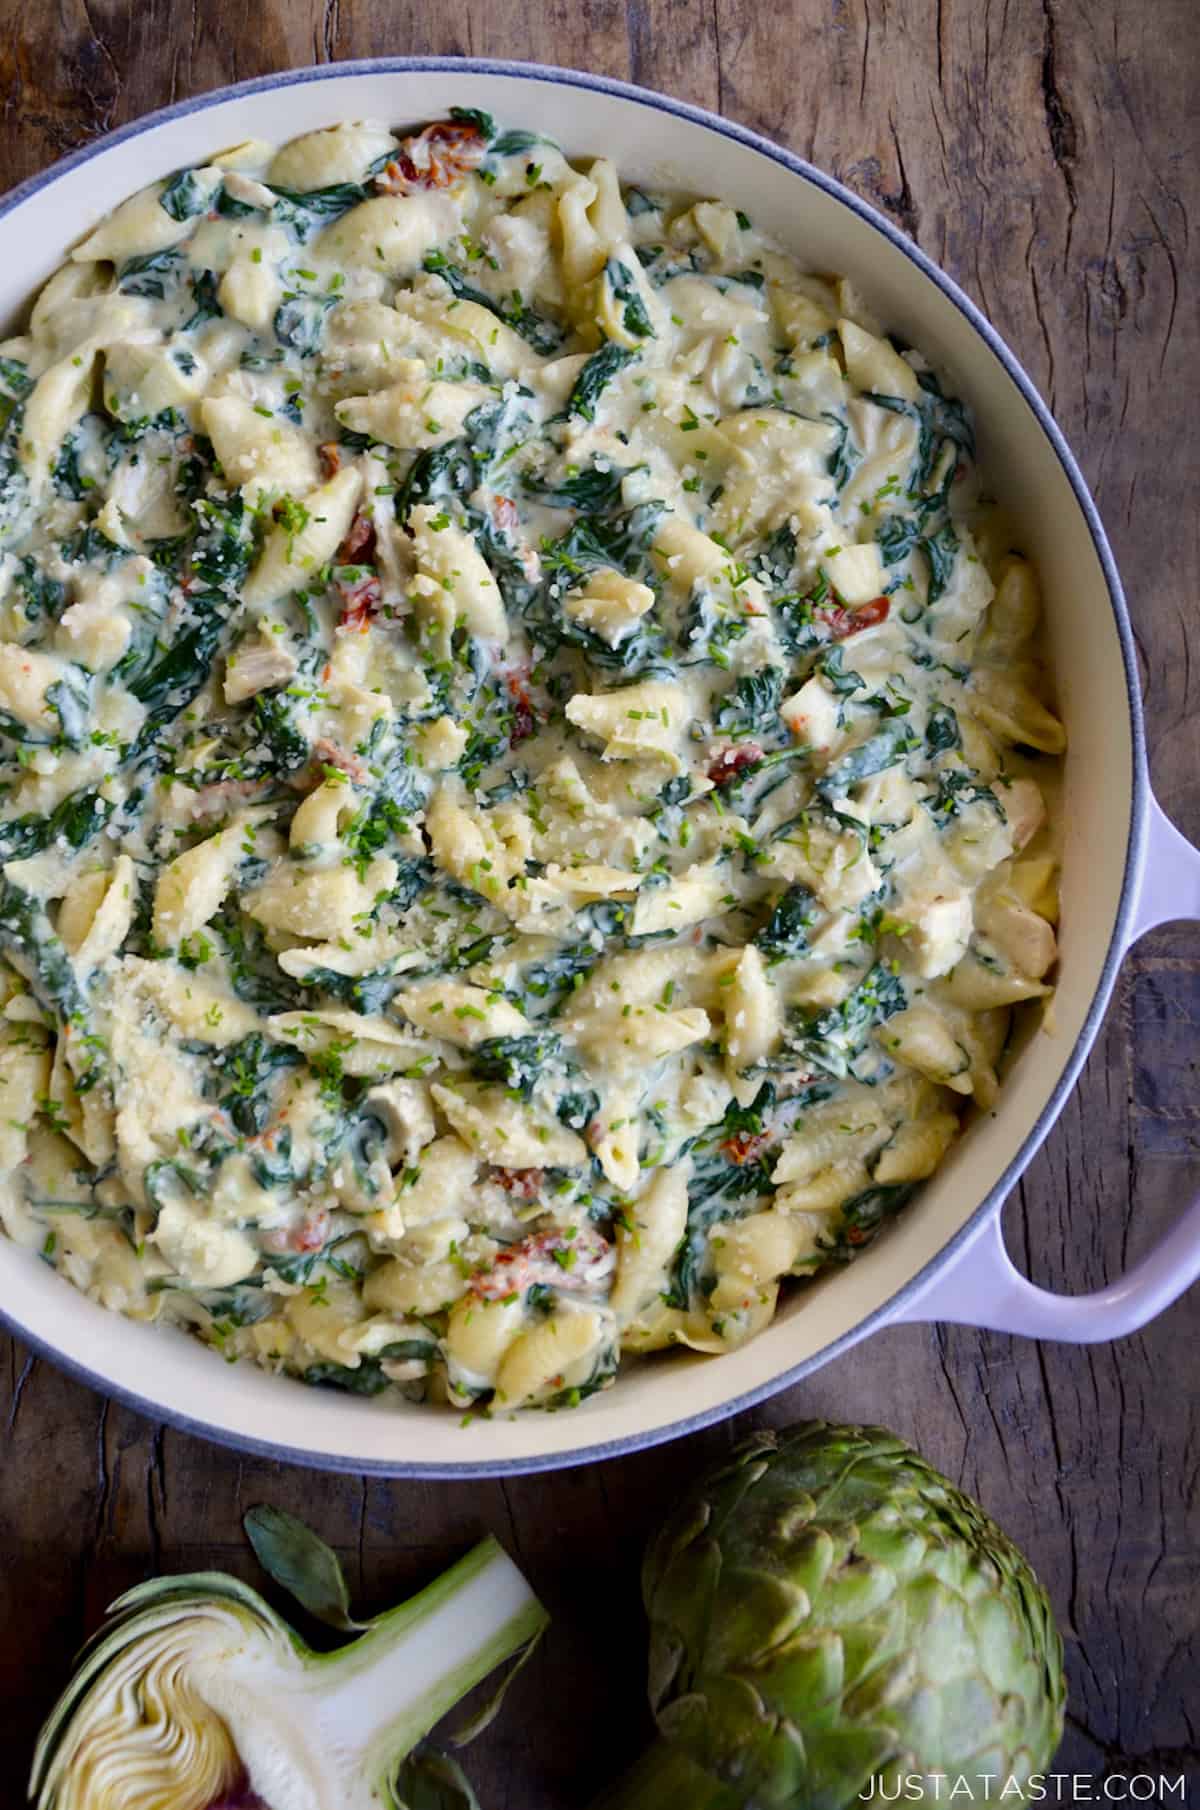 Spinach artichoke dip pasta with sun-dried tomatoes and chicken in a large lavender stockpot.